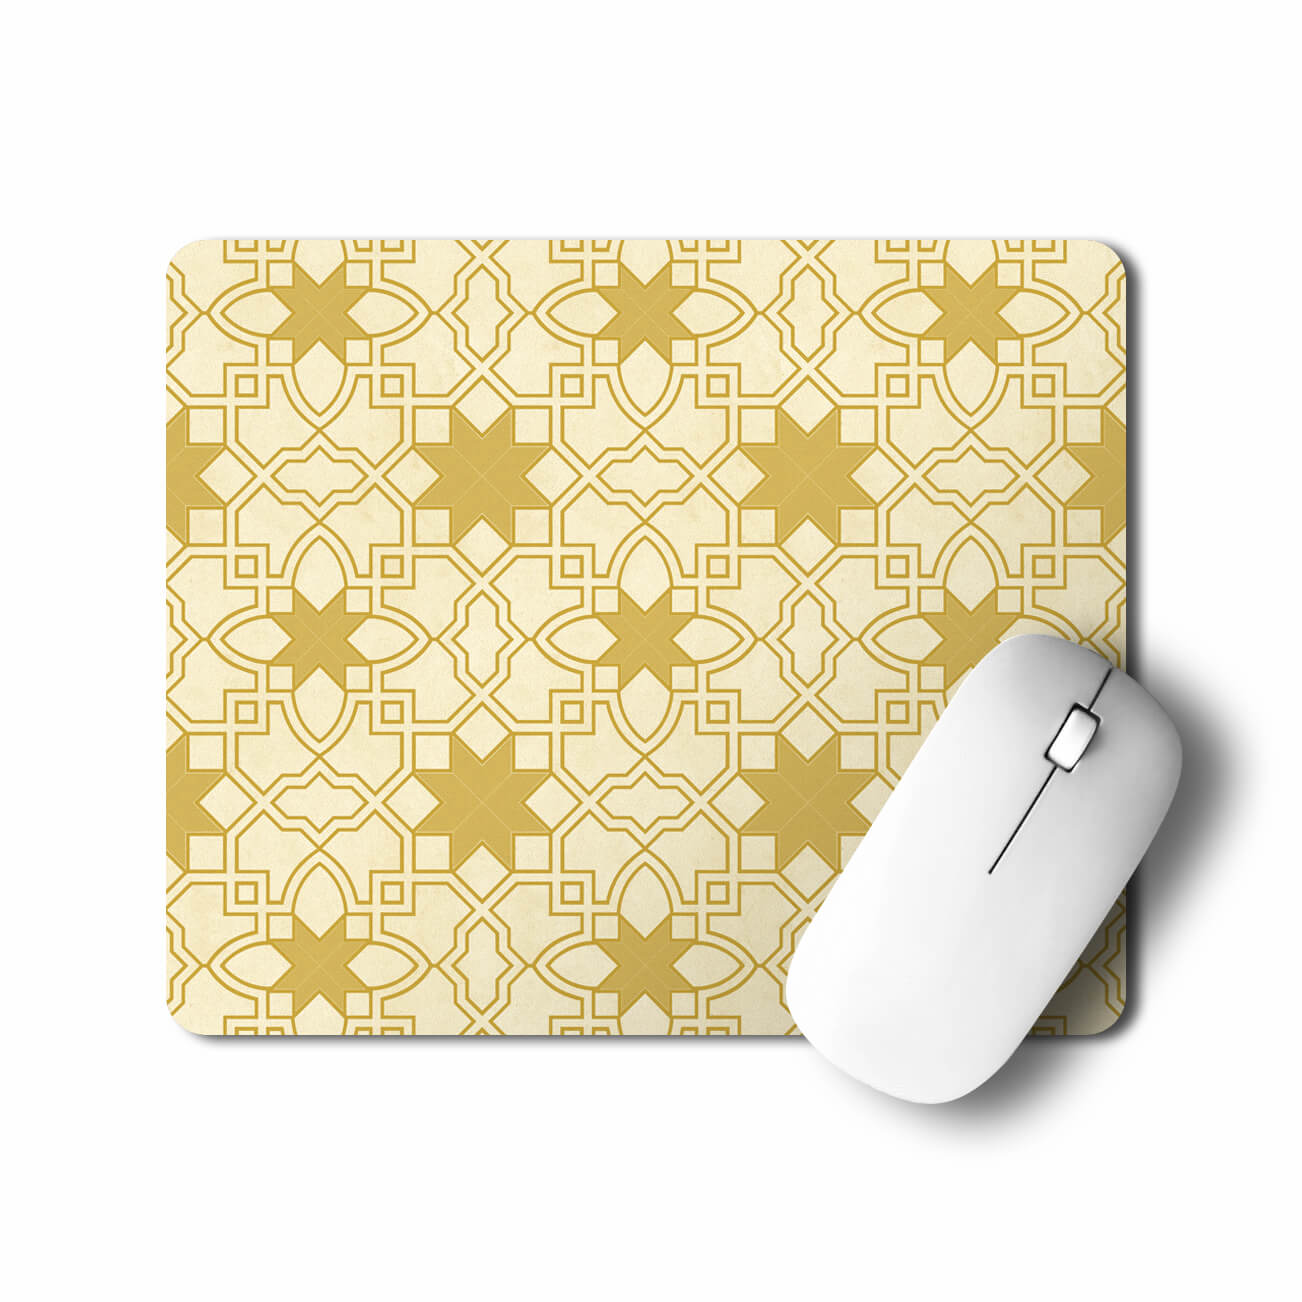 Buy Printed Mouse Pads Online at Best Price